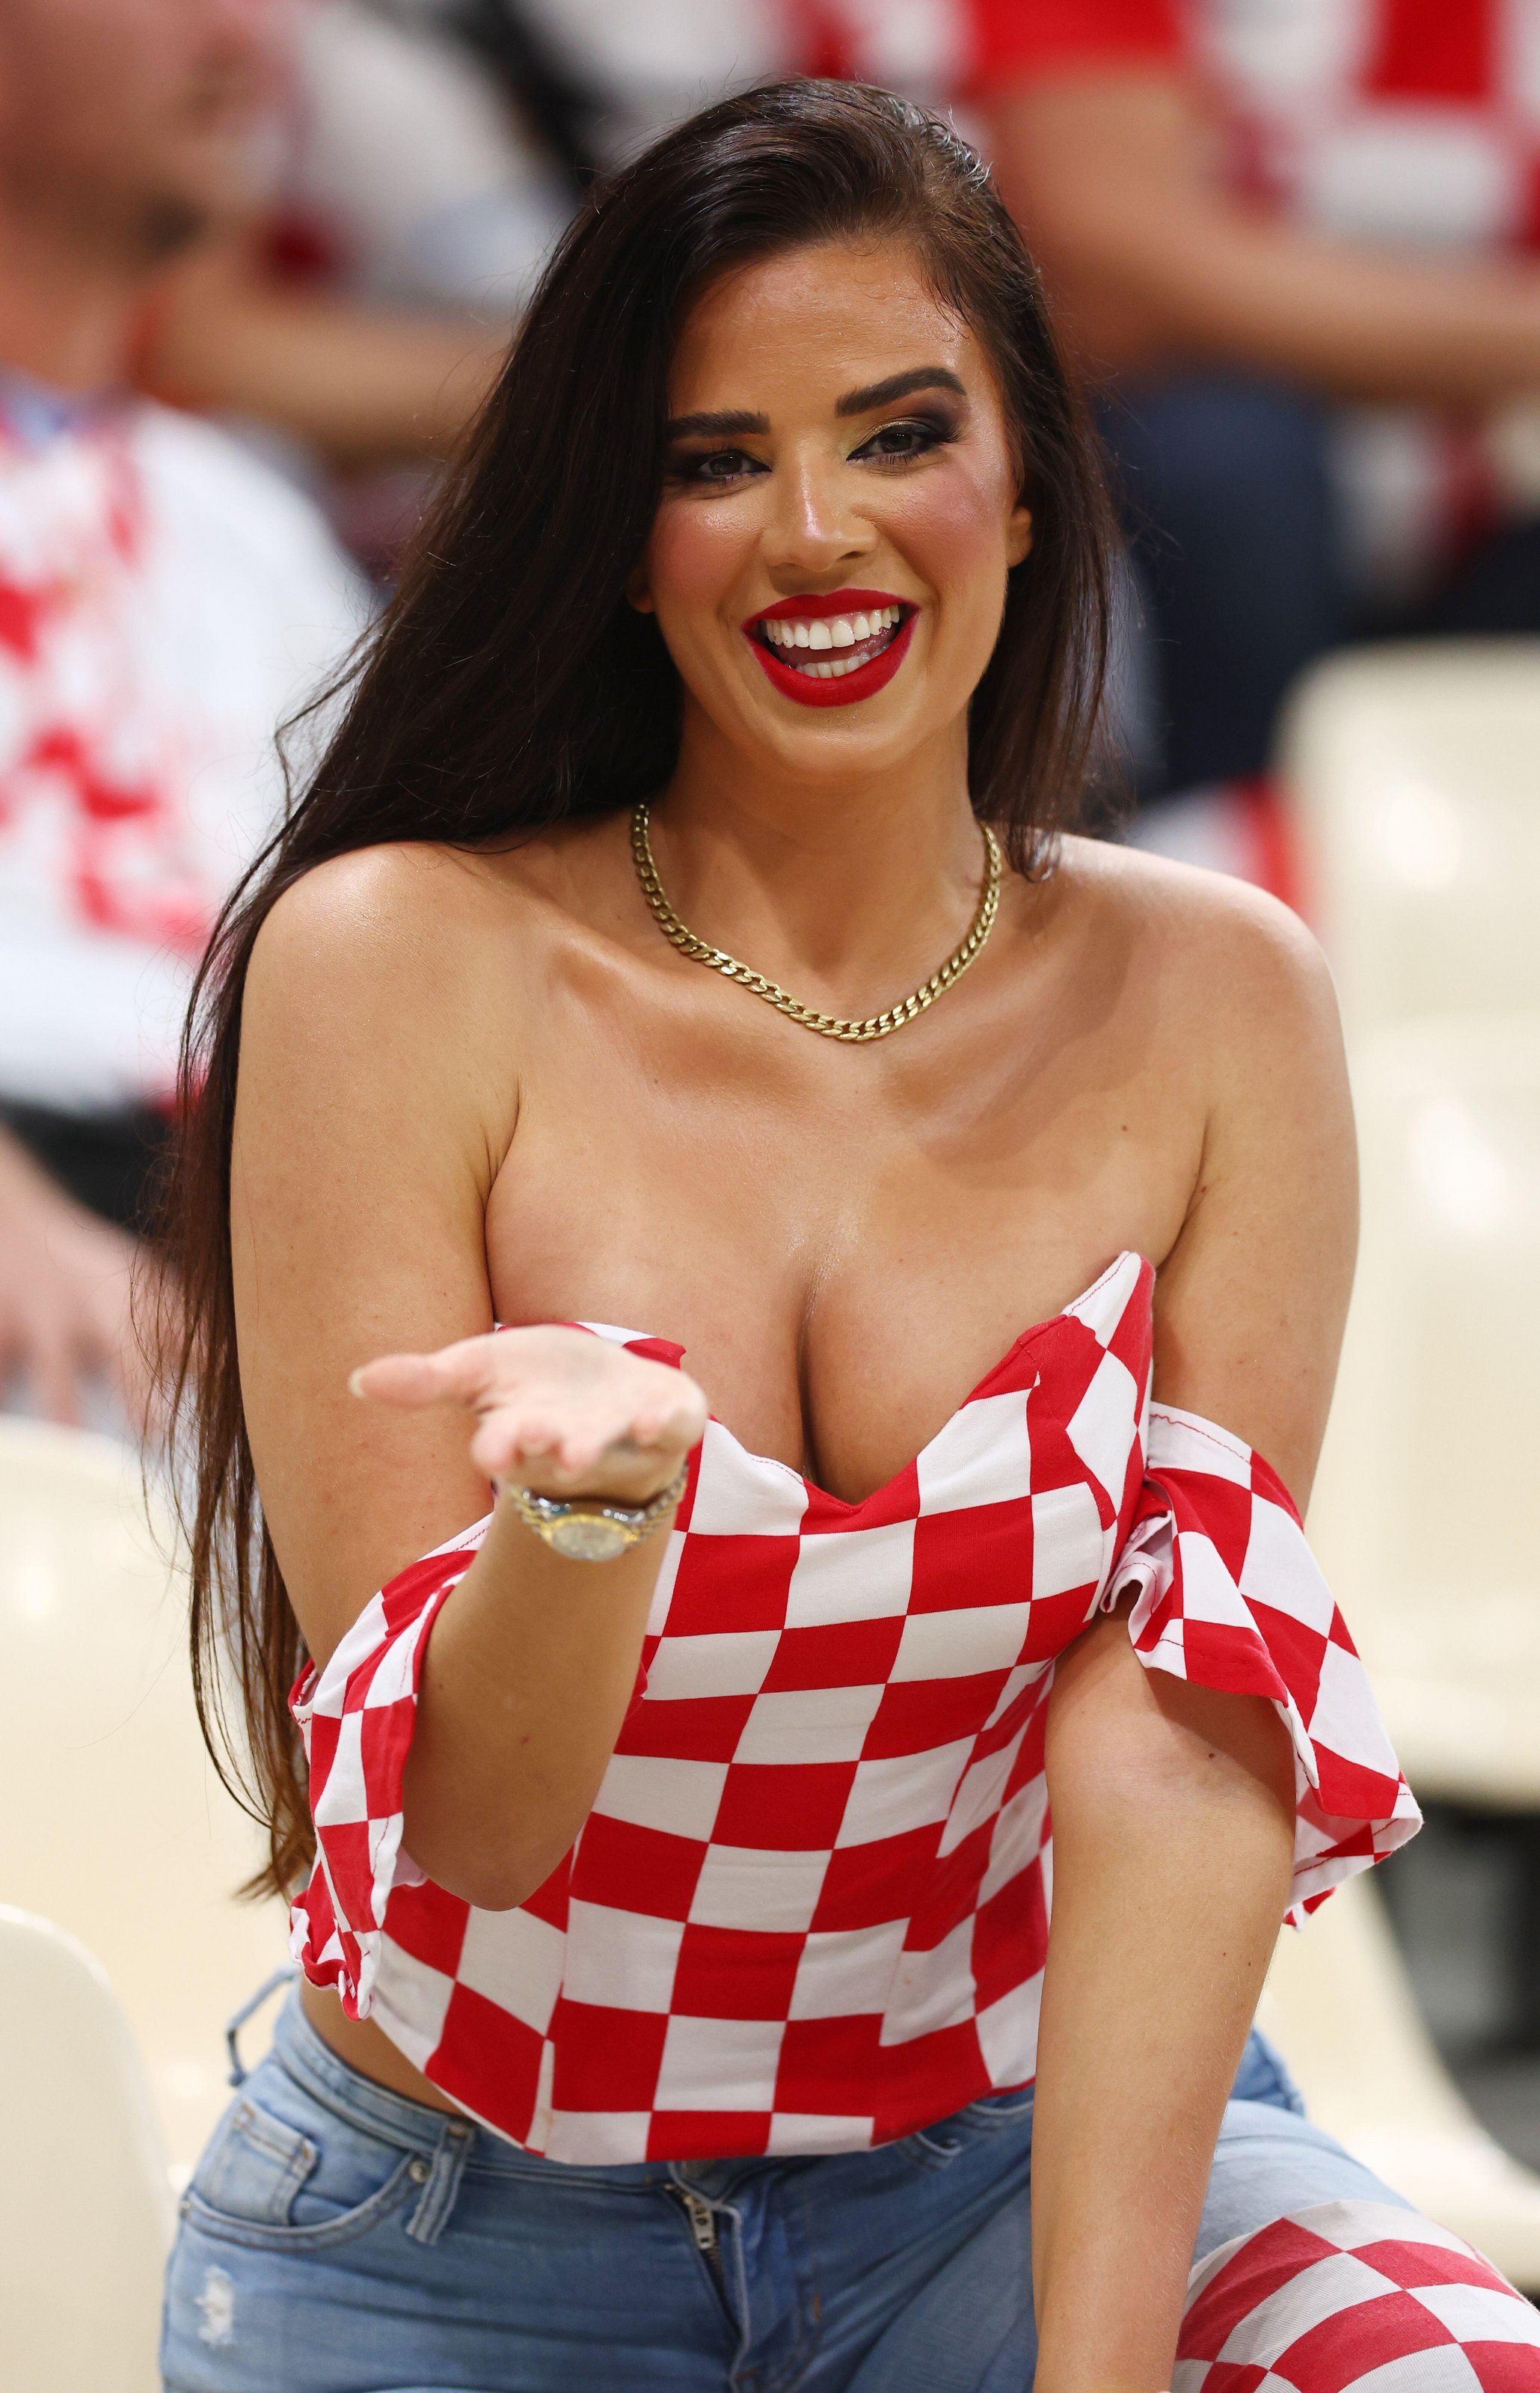 , World Cup’s ‘hottest fan’ Ivana Knoll in tears as she leaves Qatar after becoming huge Instagram sensation